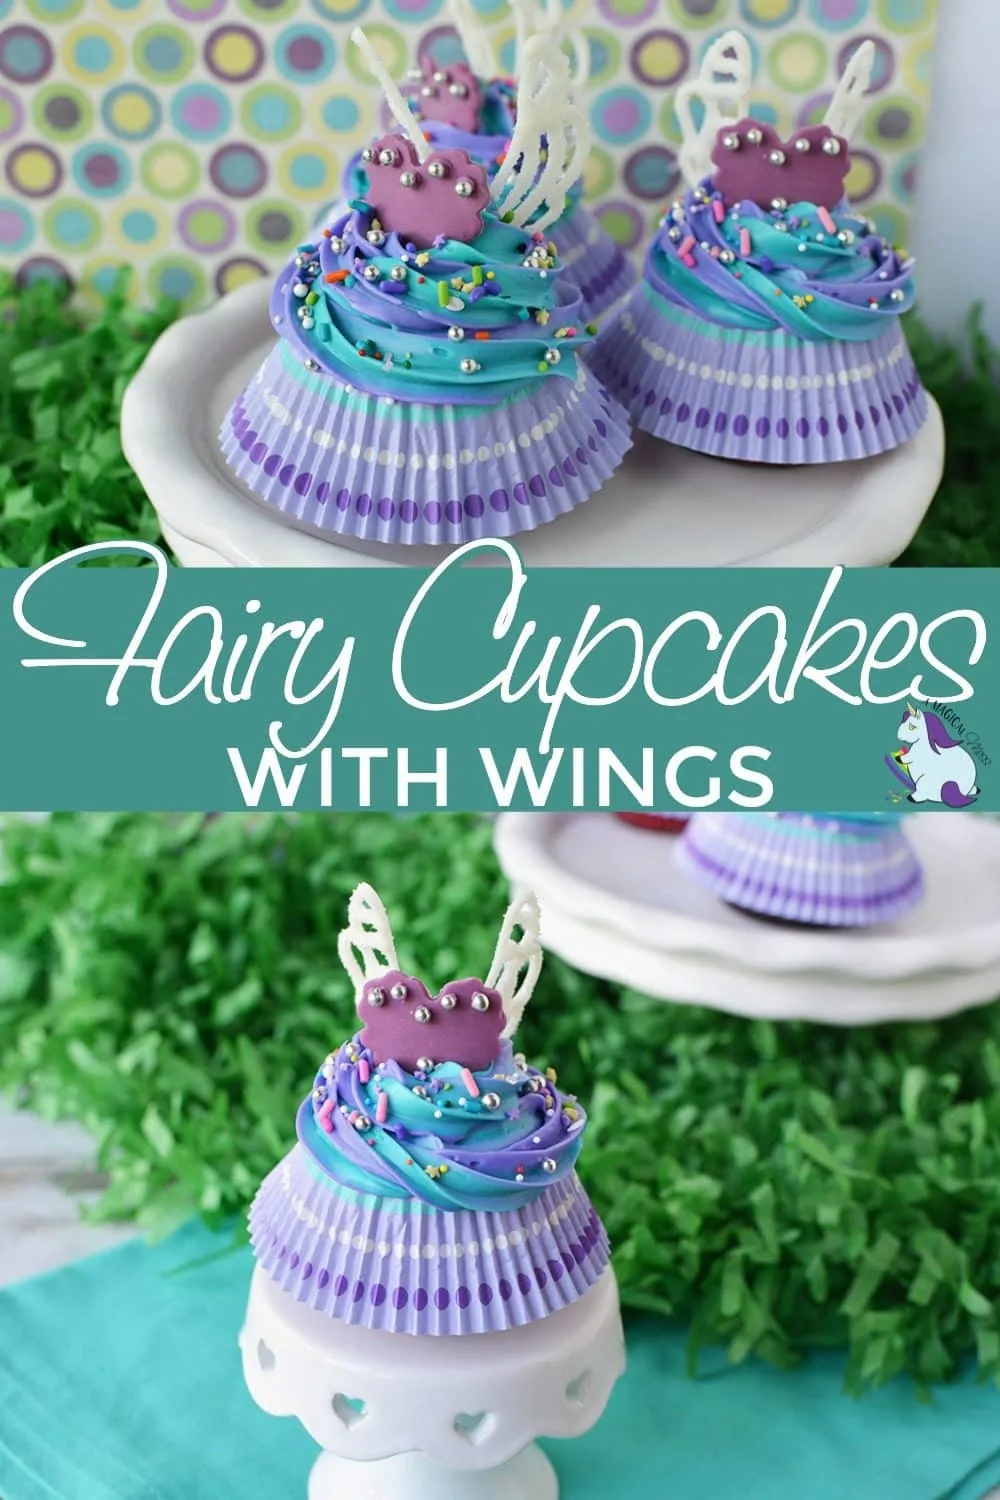 Cupcakes that look like fairies on a stand